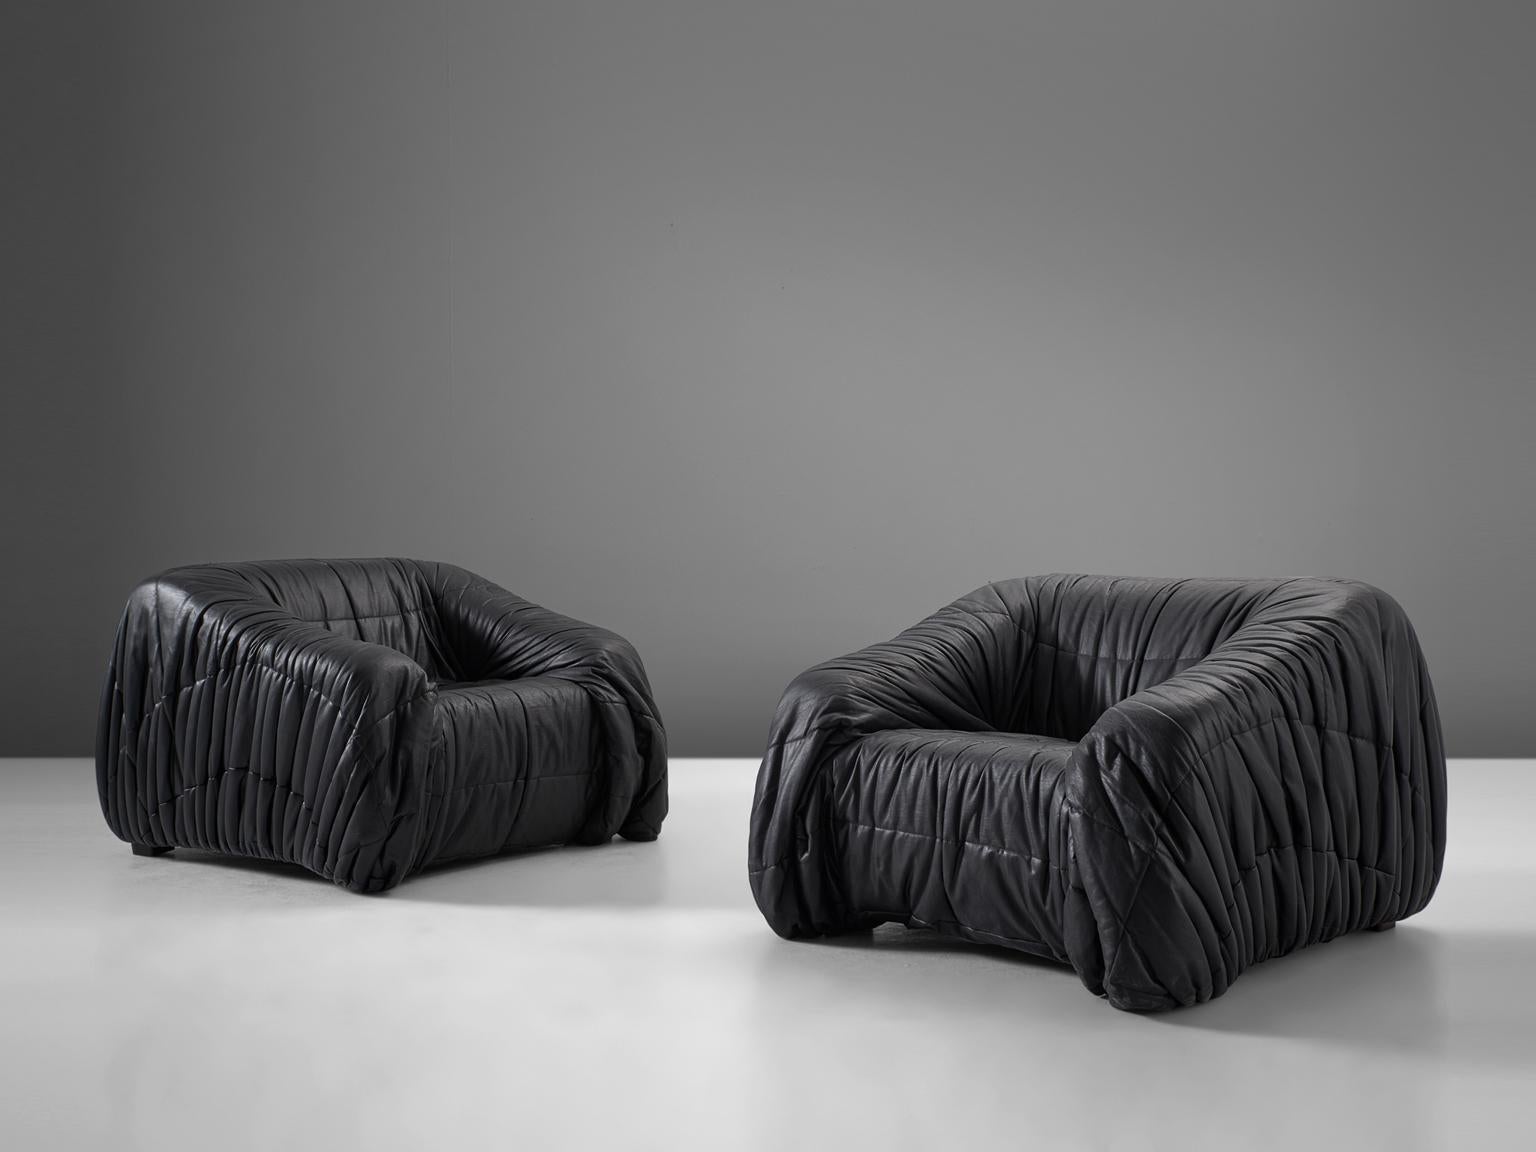 Jonathan de Pas, Donato D'urbino & Paolo Lomazzi for Dell'Oca, 'Piumino' lounge chairs, leatherette, Italy, 1970

These lounge chairs are completely moulded out of foam and covered with folded black, thick but soft leatherette. One of the main